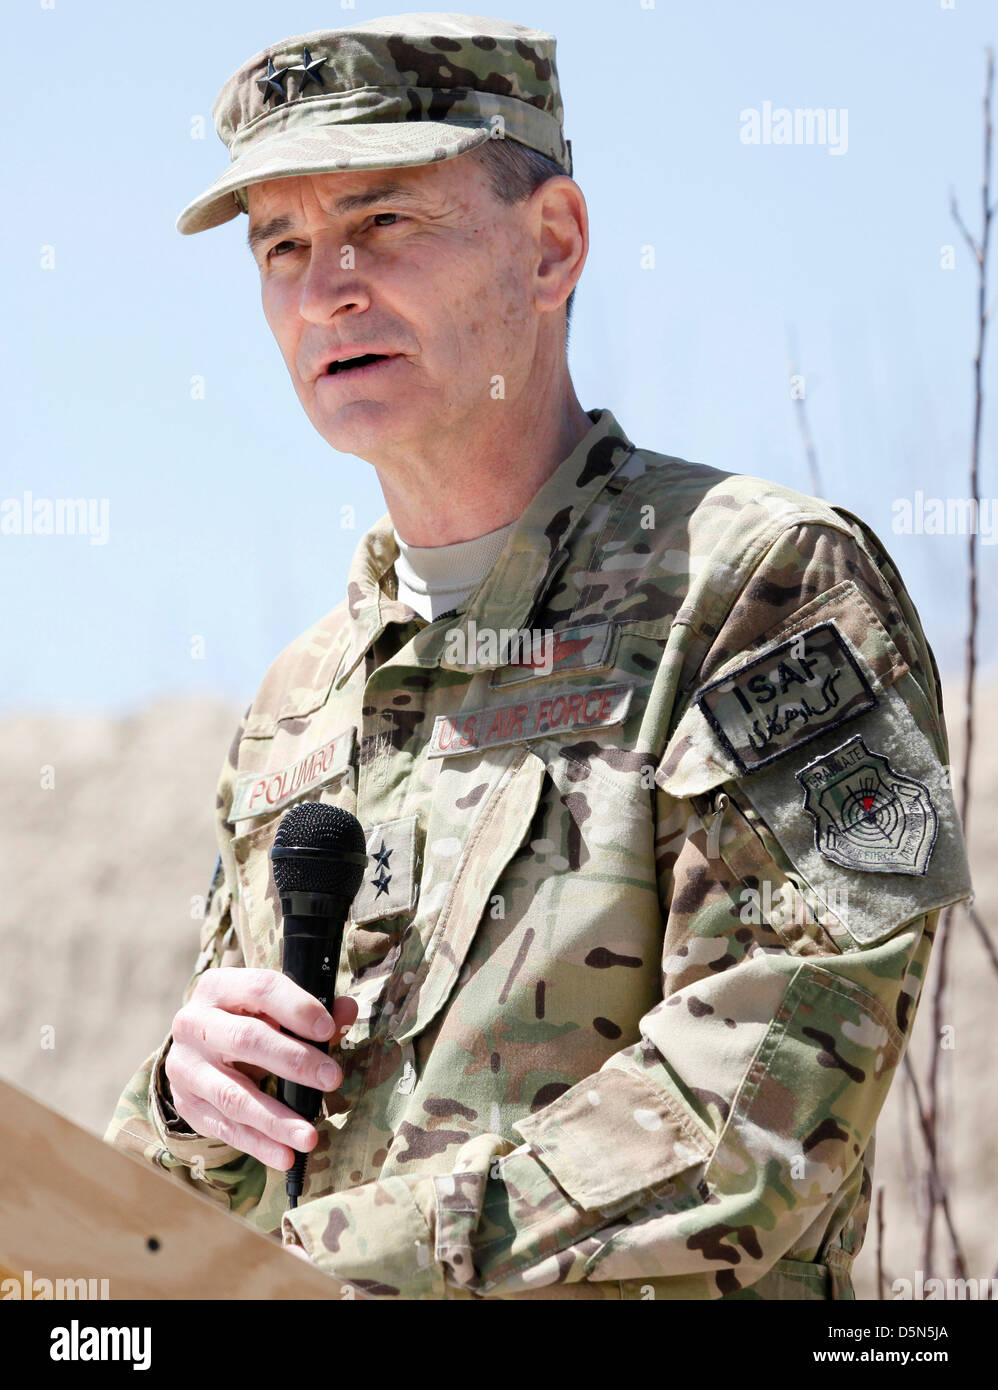 US Air Force Maj. Gen. Harry Polumbo during the closing ceremony of Provincial Reconstruction Team Gardez April 3, 2013 in Gardez, Afghanistan. A PRT is a military and civilian assistance program for rebuilding and stabilizing the local government. The closing was the first PRT to shut in Afghanistan after being established in January 2003 as the US winds down in Afghanistan. Stock Photo